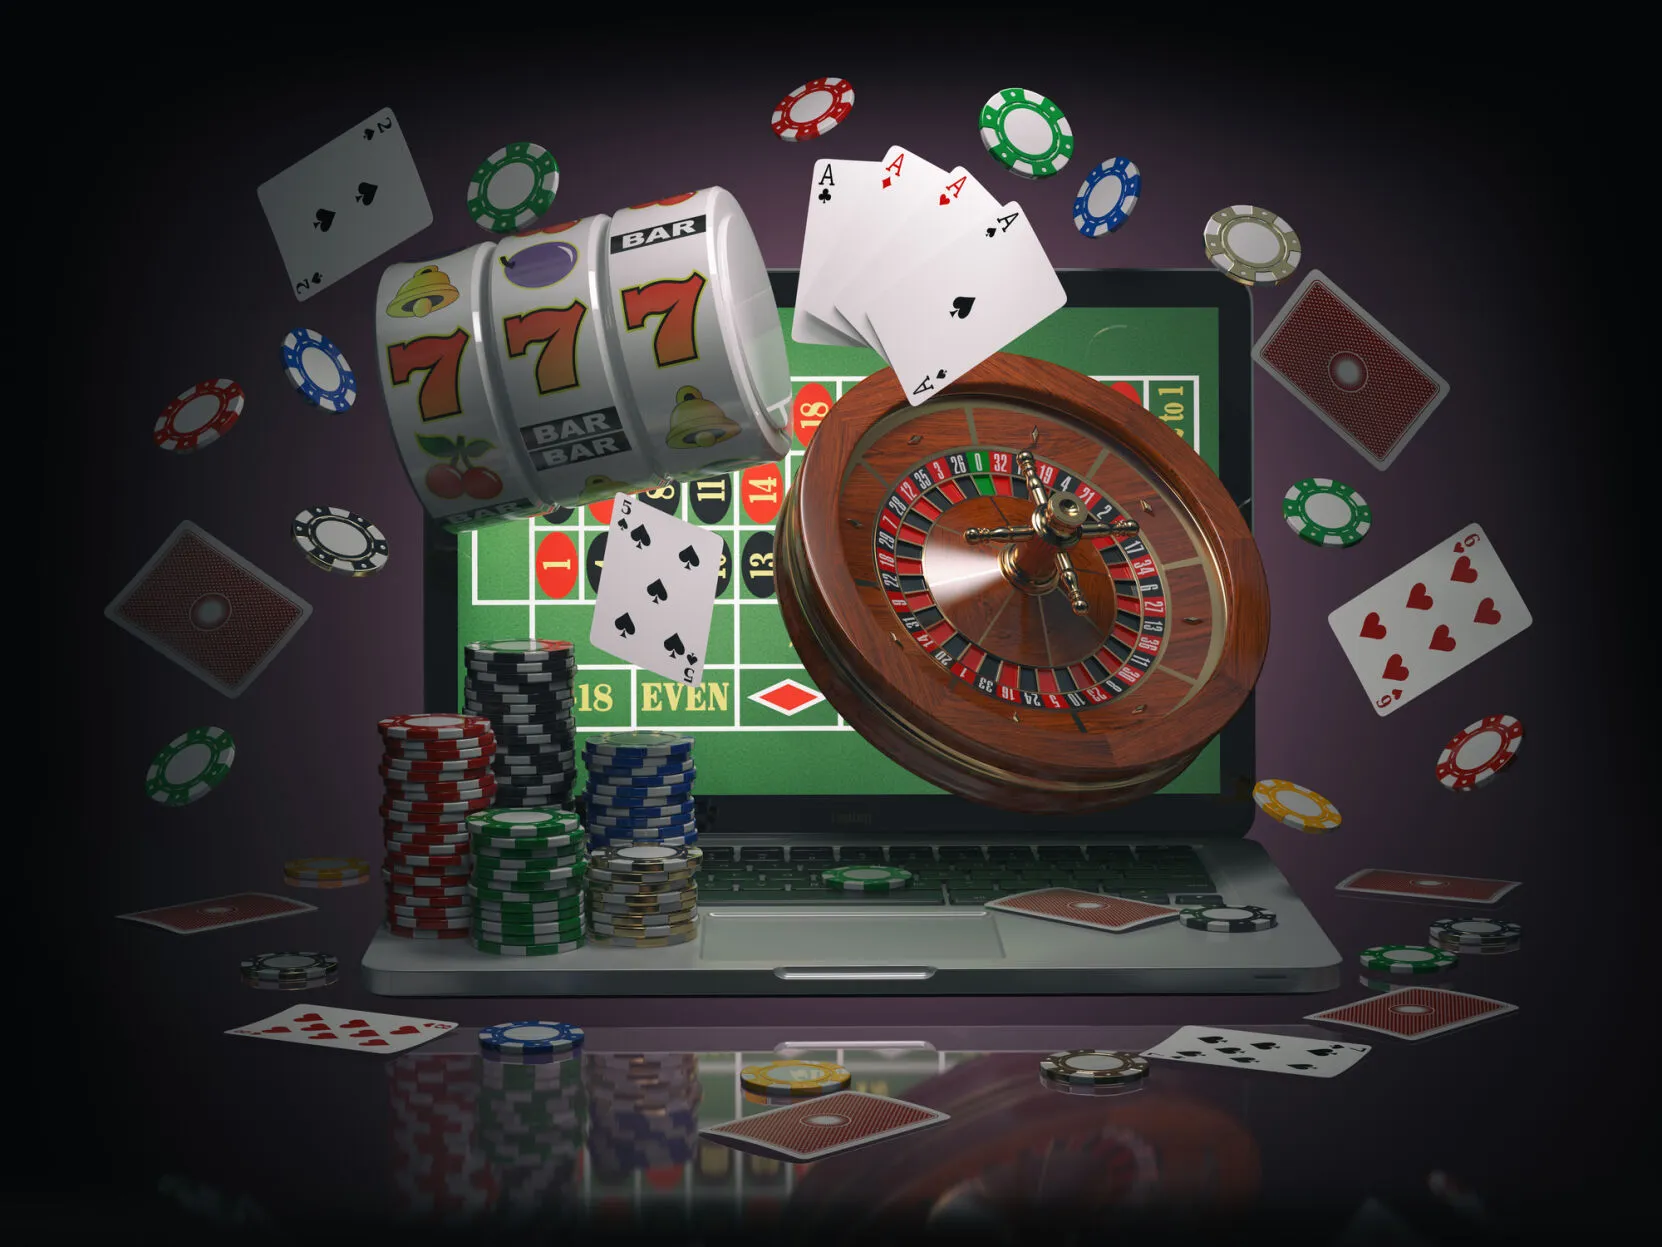 Are You Missing Out? Discover the Abundance of Choices in Online Gambling